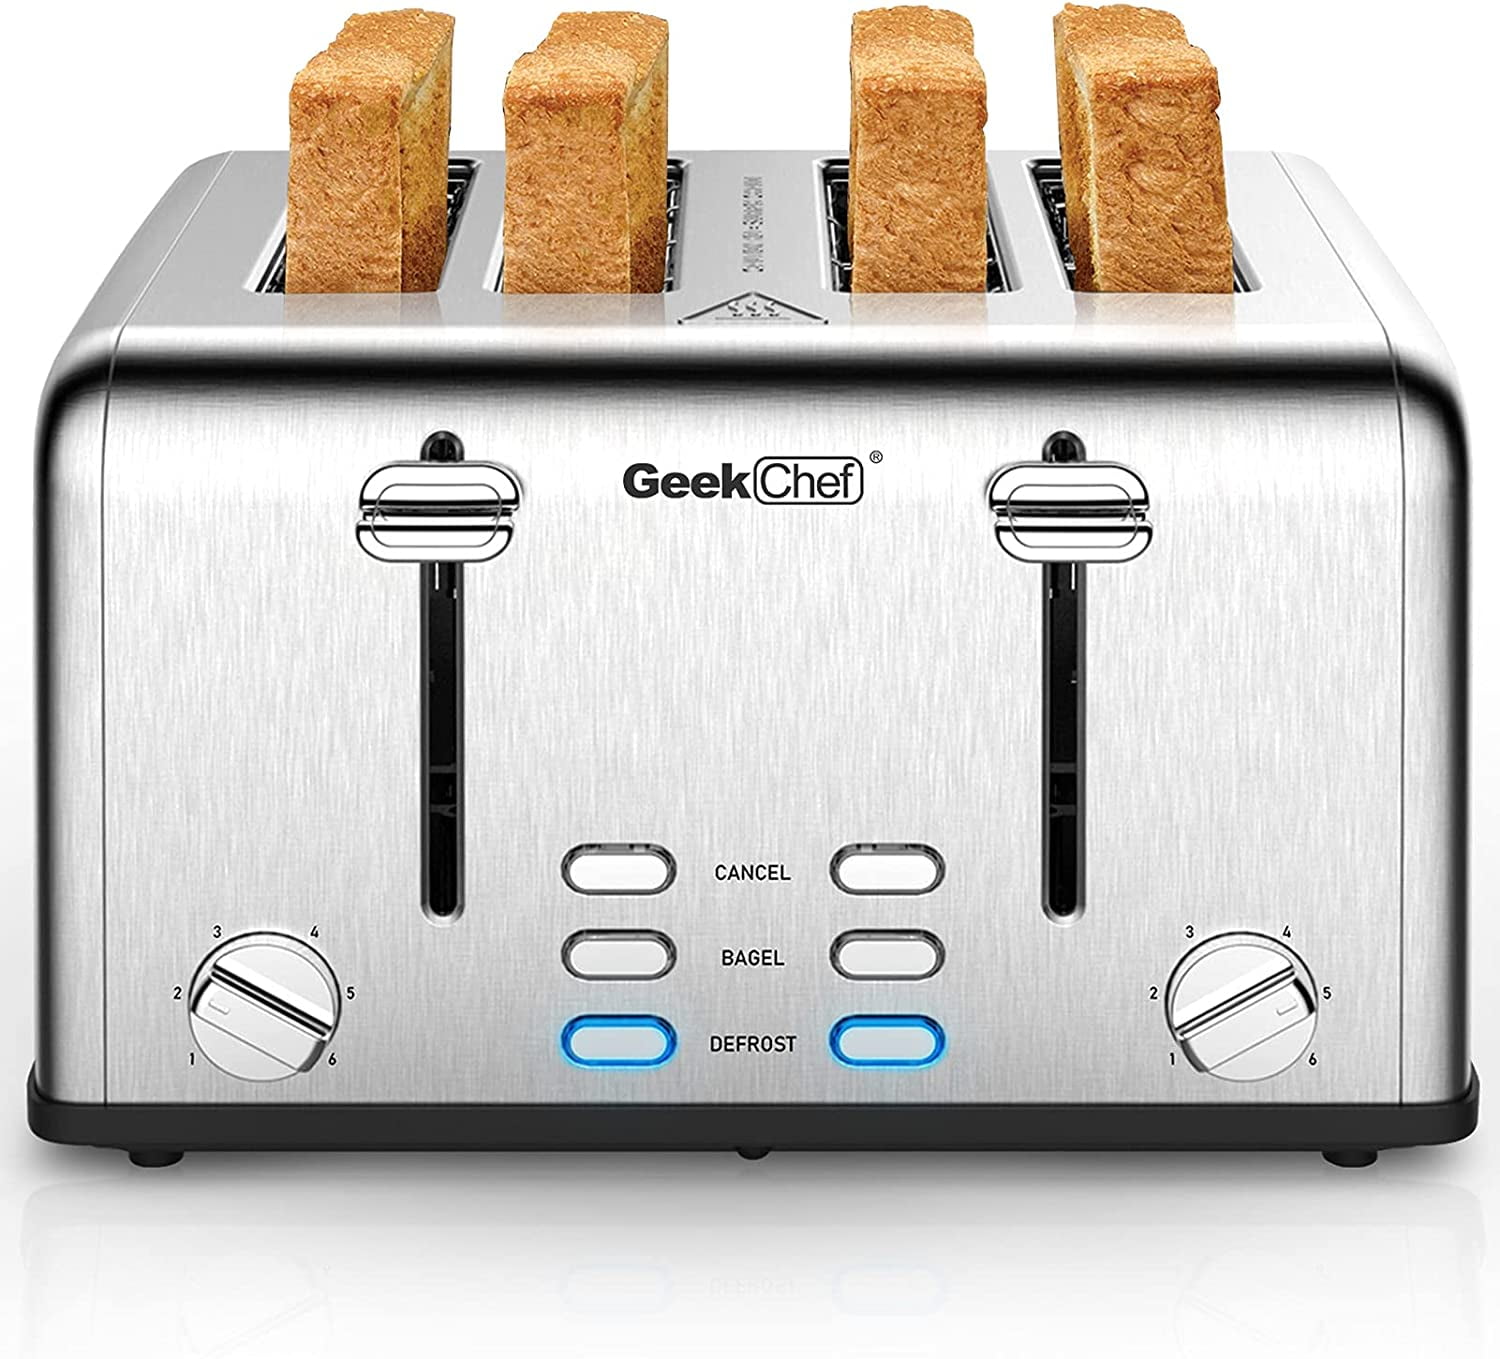 4 Slice Extra wide Long Slots Toaster Reheat Bagel Kitchen Stainless steel  New